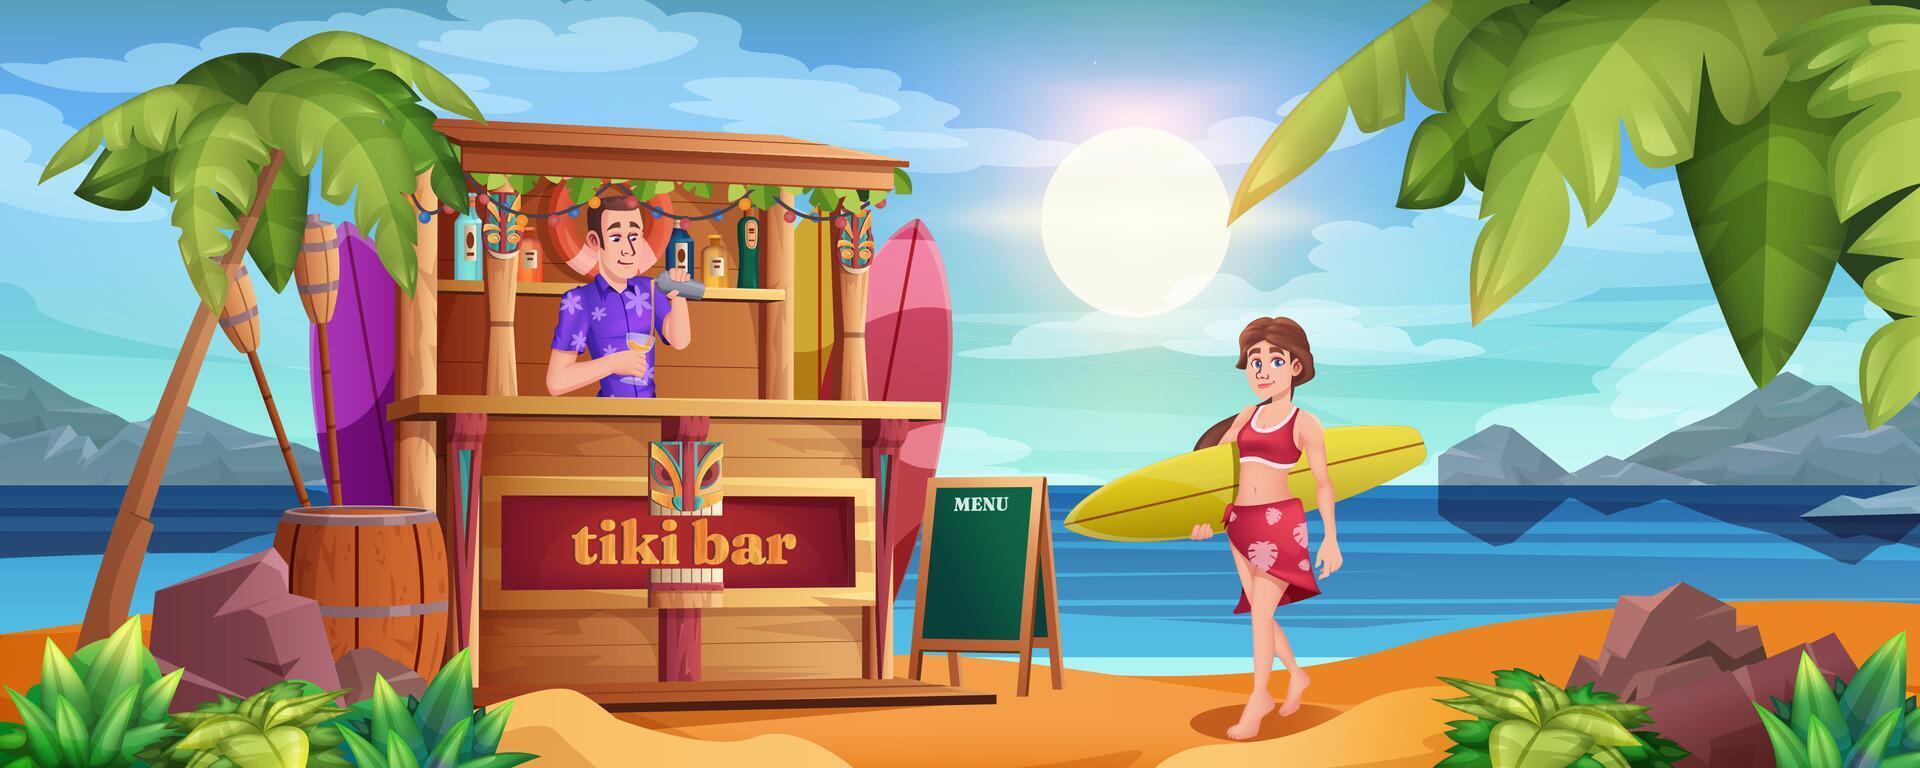 Cartoon summer beach with tiki bar and barman. Smiling girl in summer dress with surfboard at ocean sandy coastline with palm trees. Bartender with cocktails and wooden hut on sea. vector